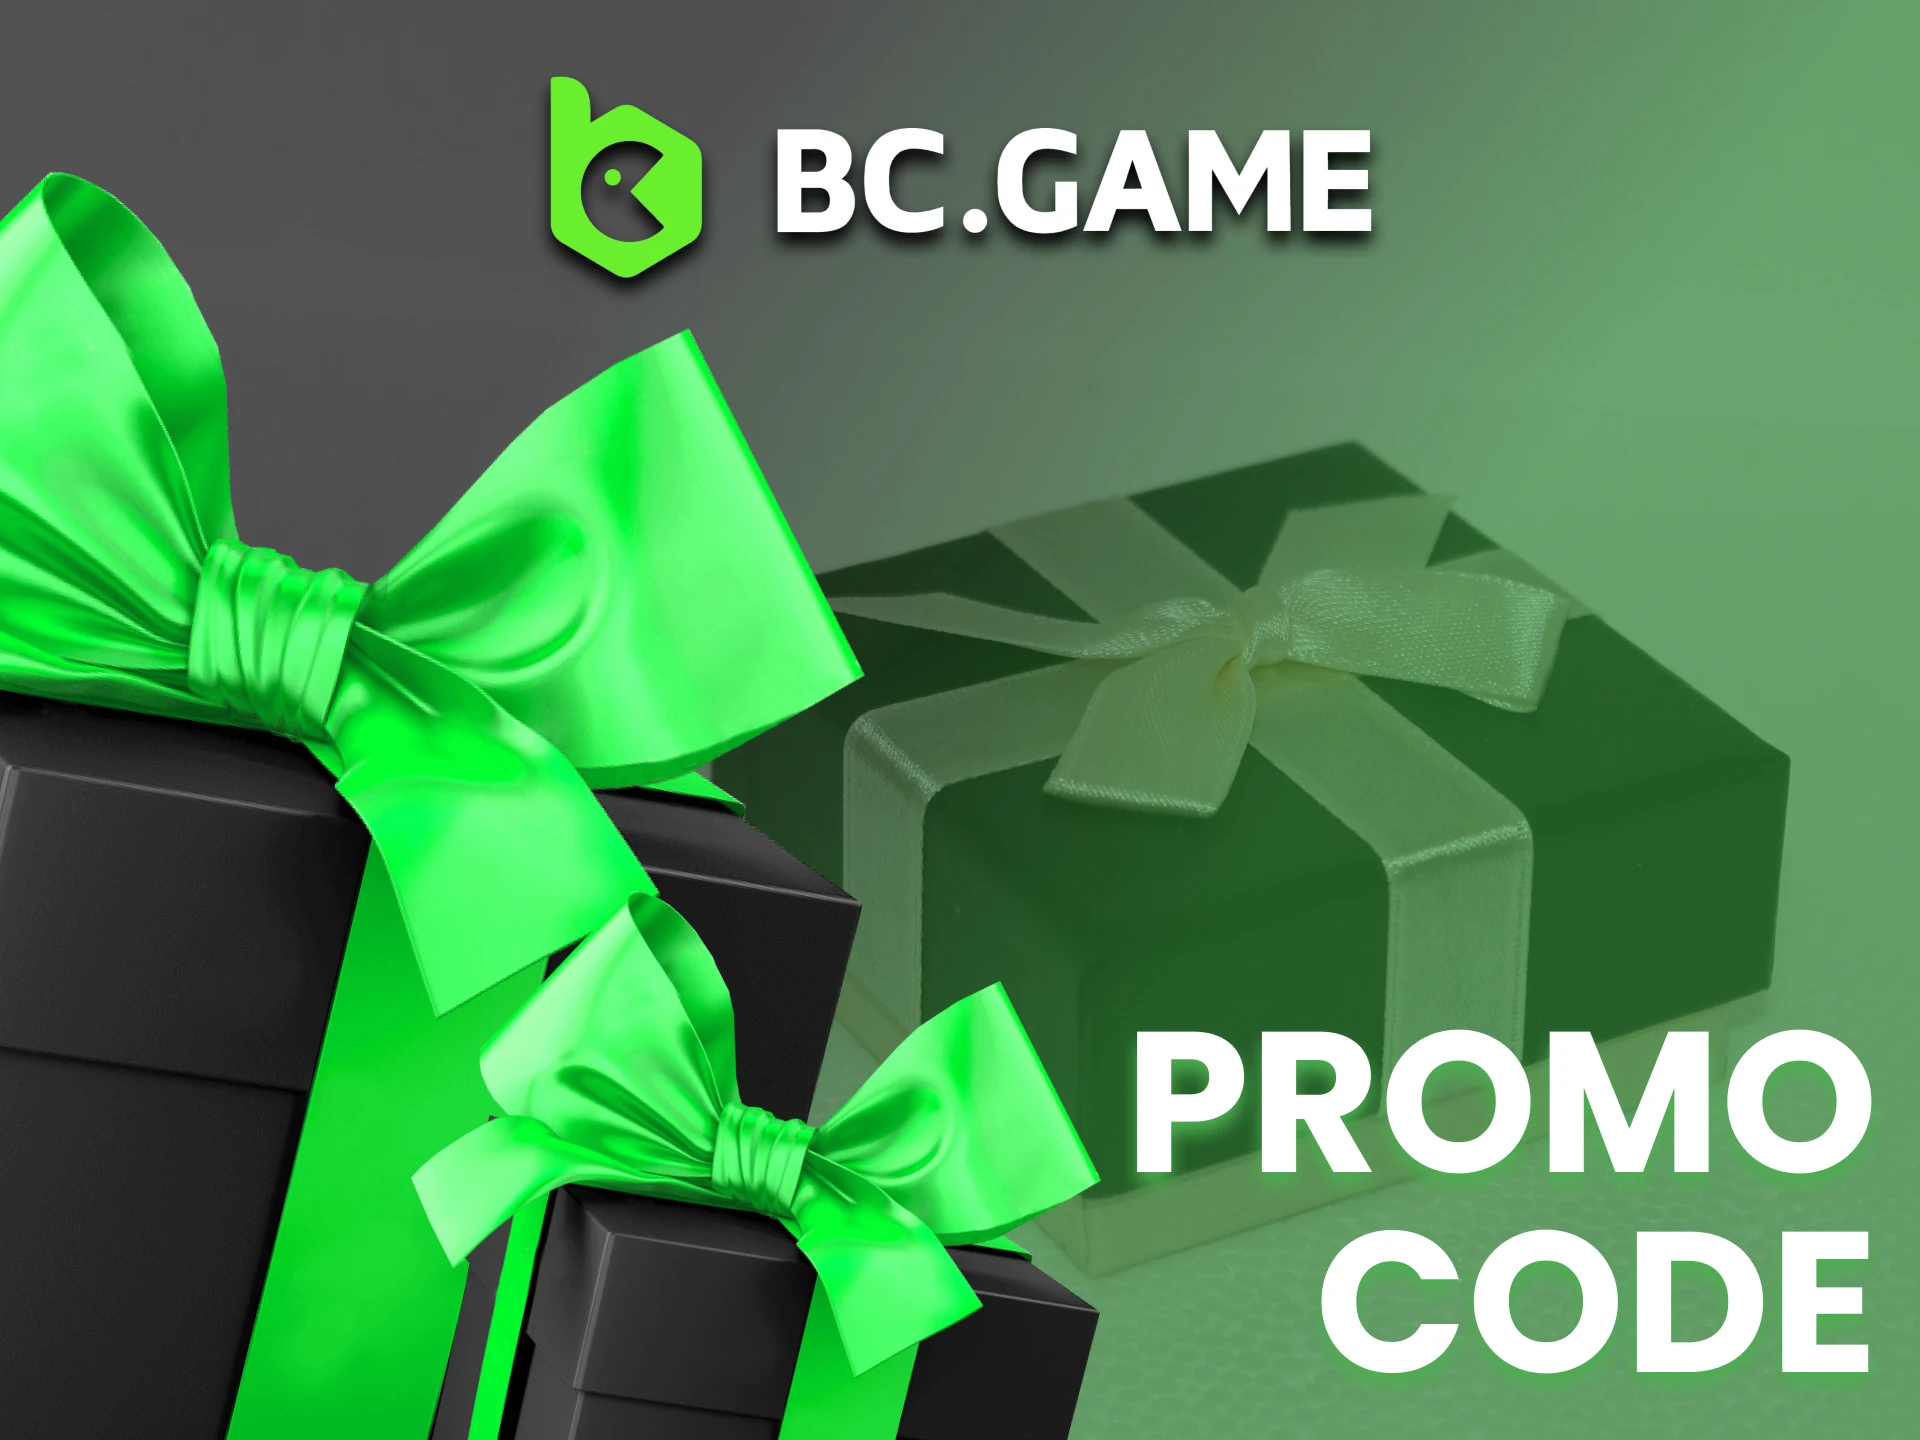 Search for new BC Game promocodes for using them in app.